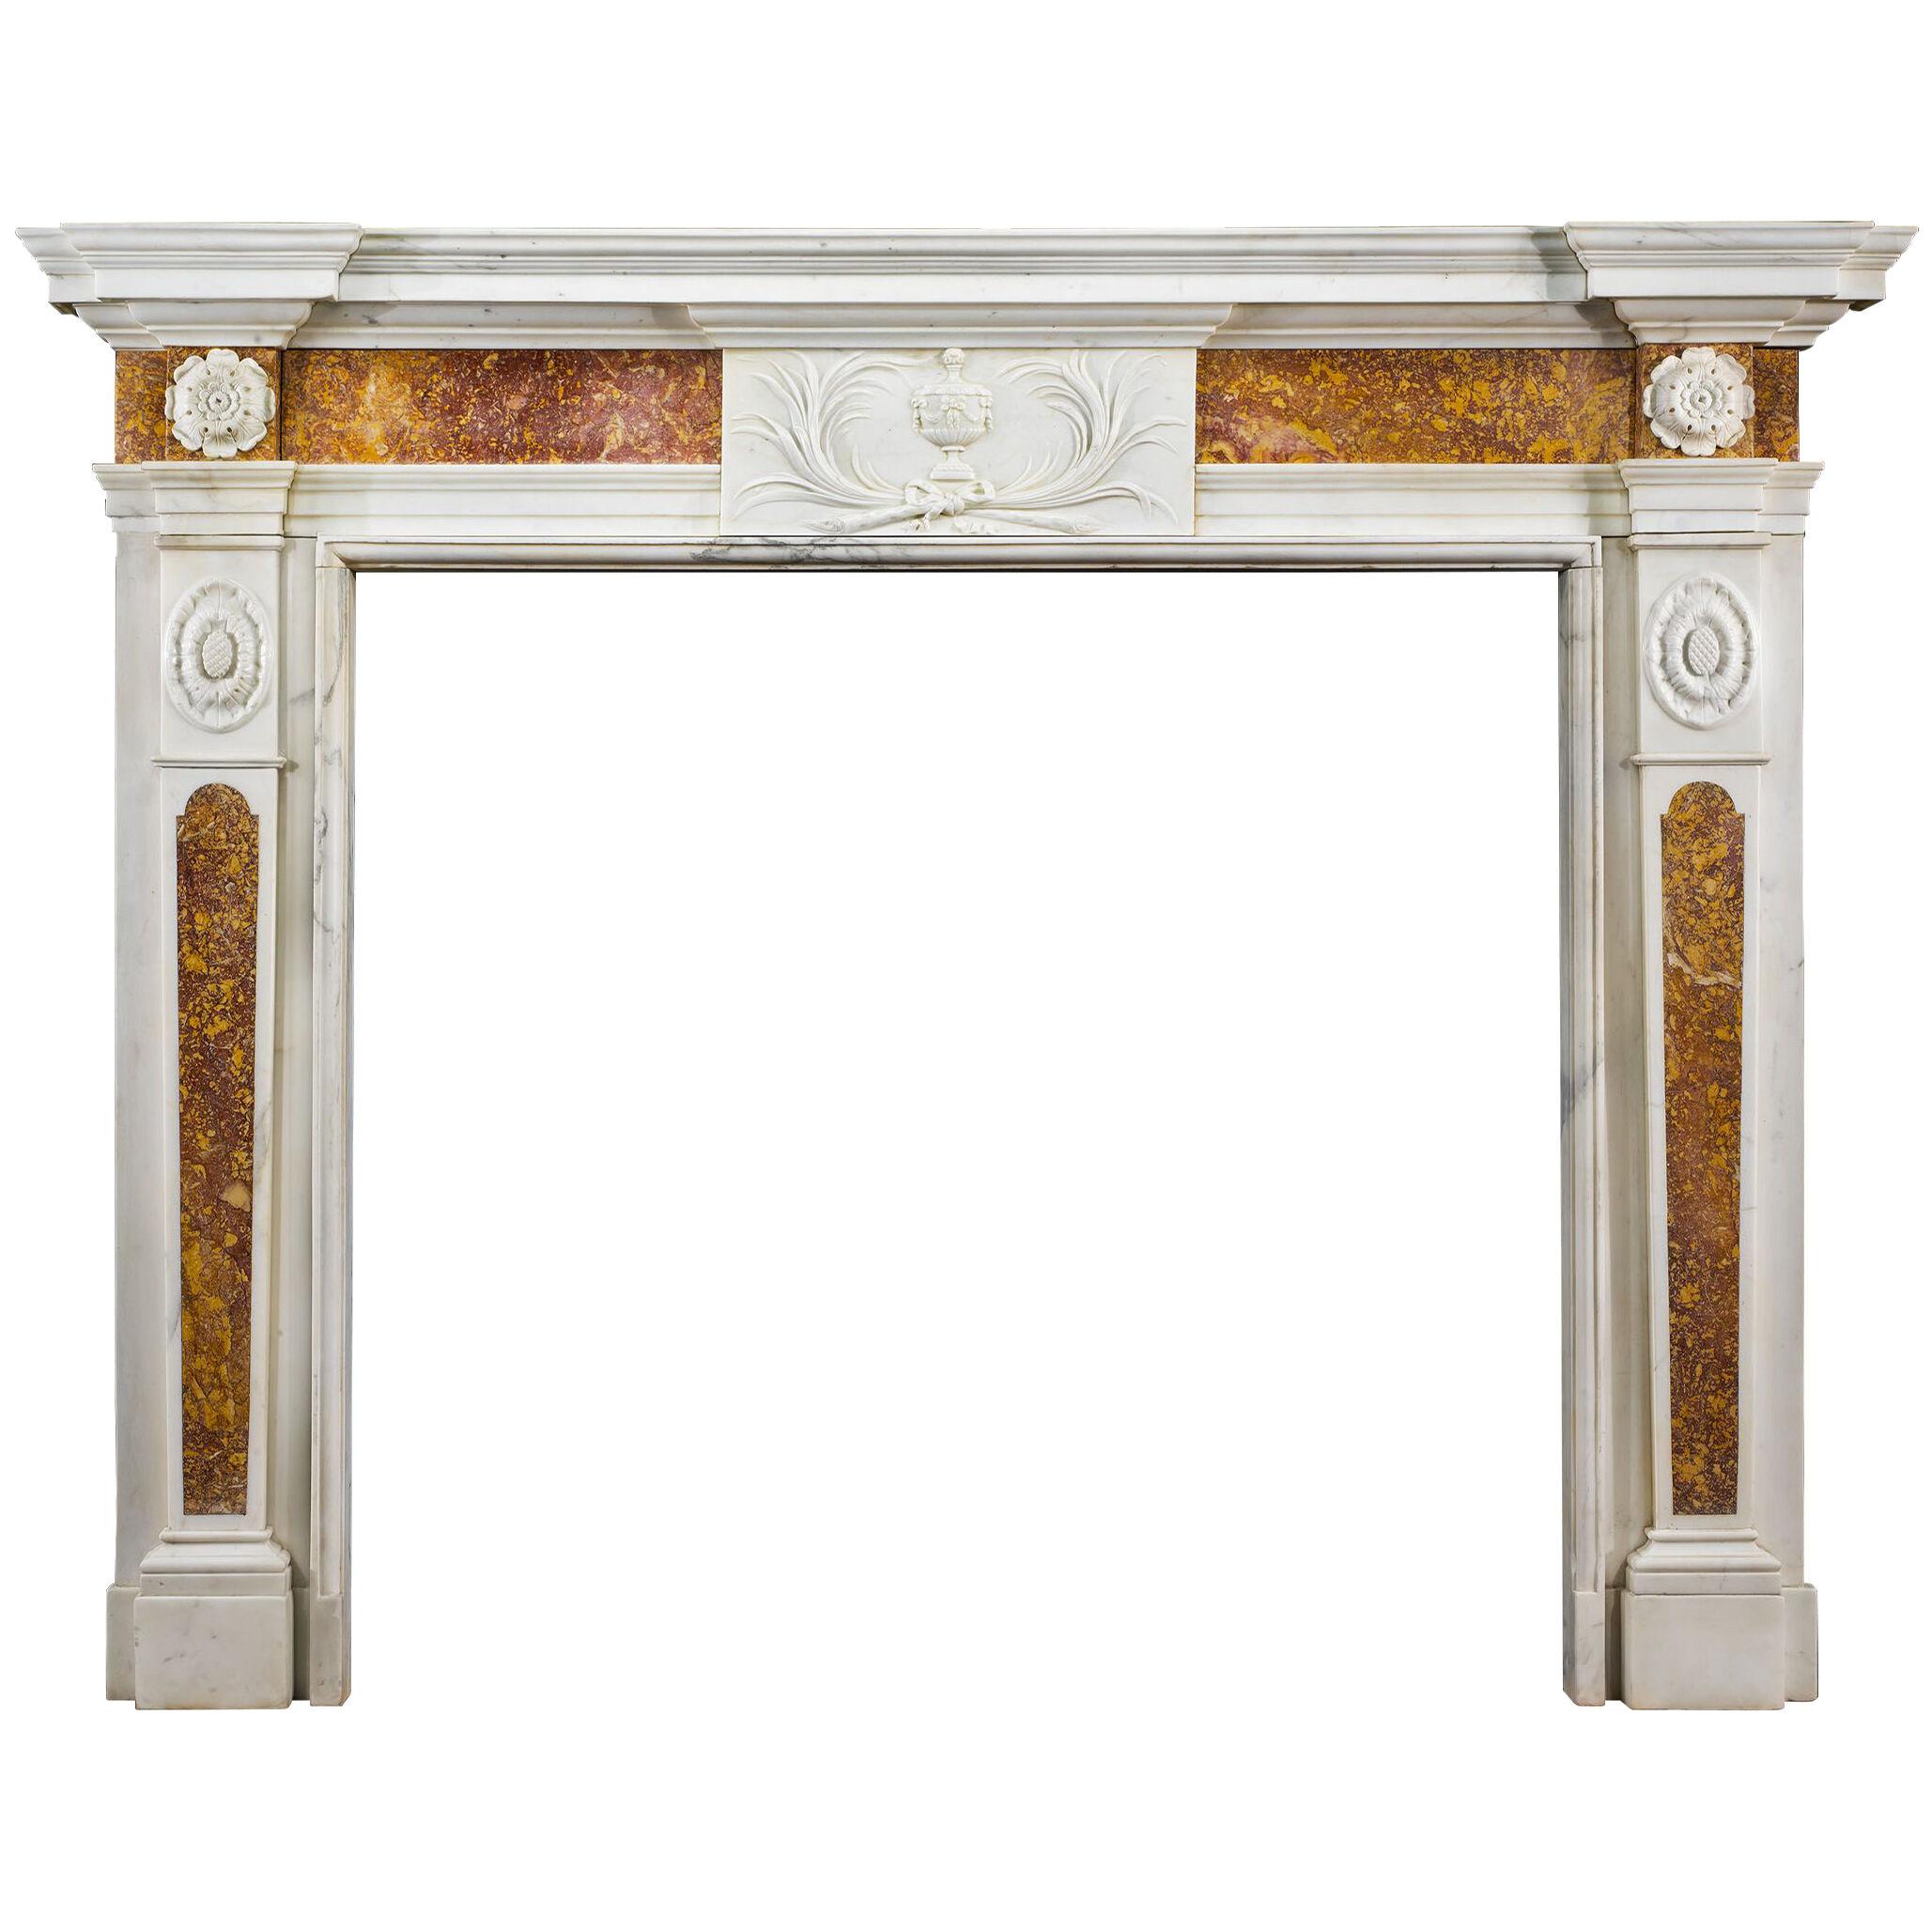 An 18th century Statuary and Brocatelle Marble Chimneypiece